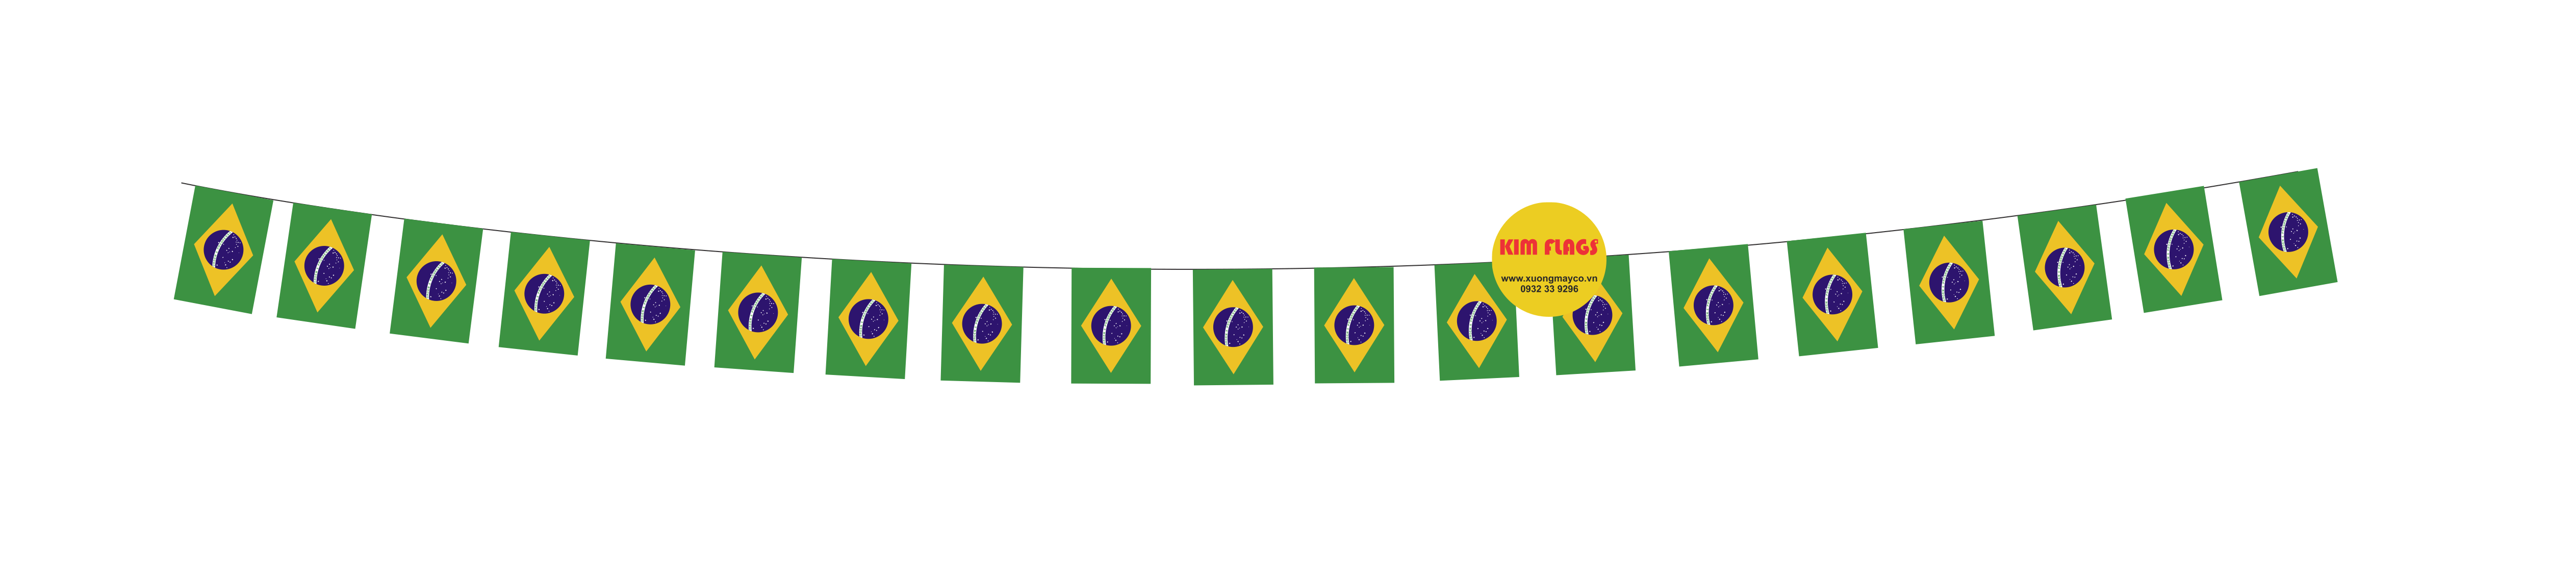 National bunting, national string flags